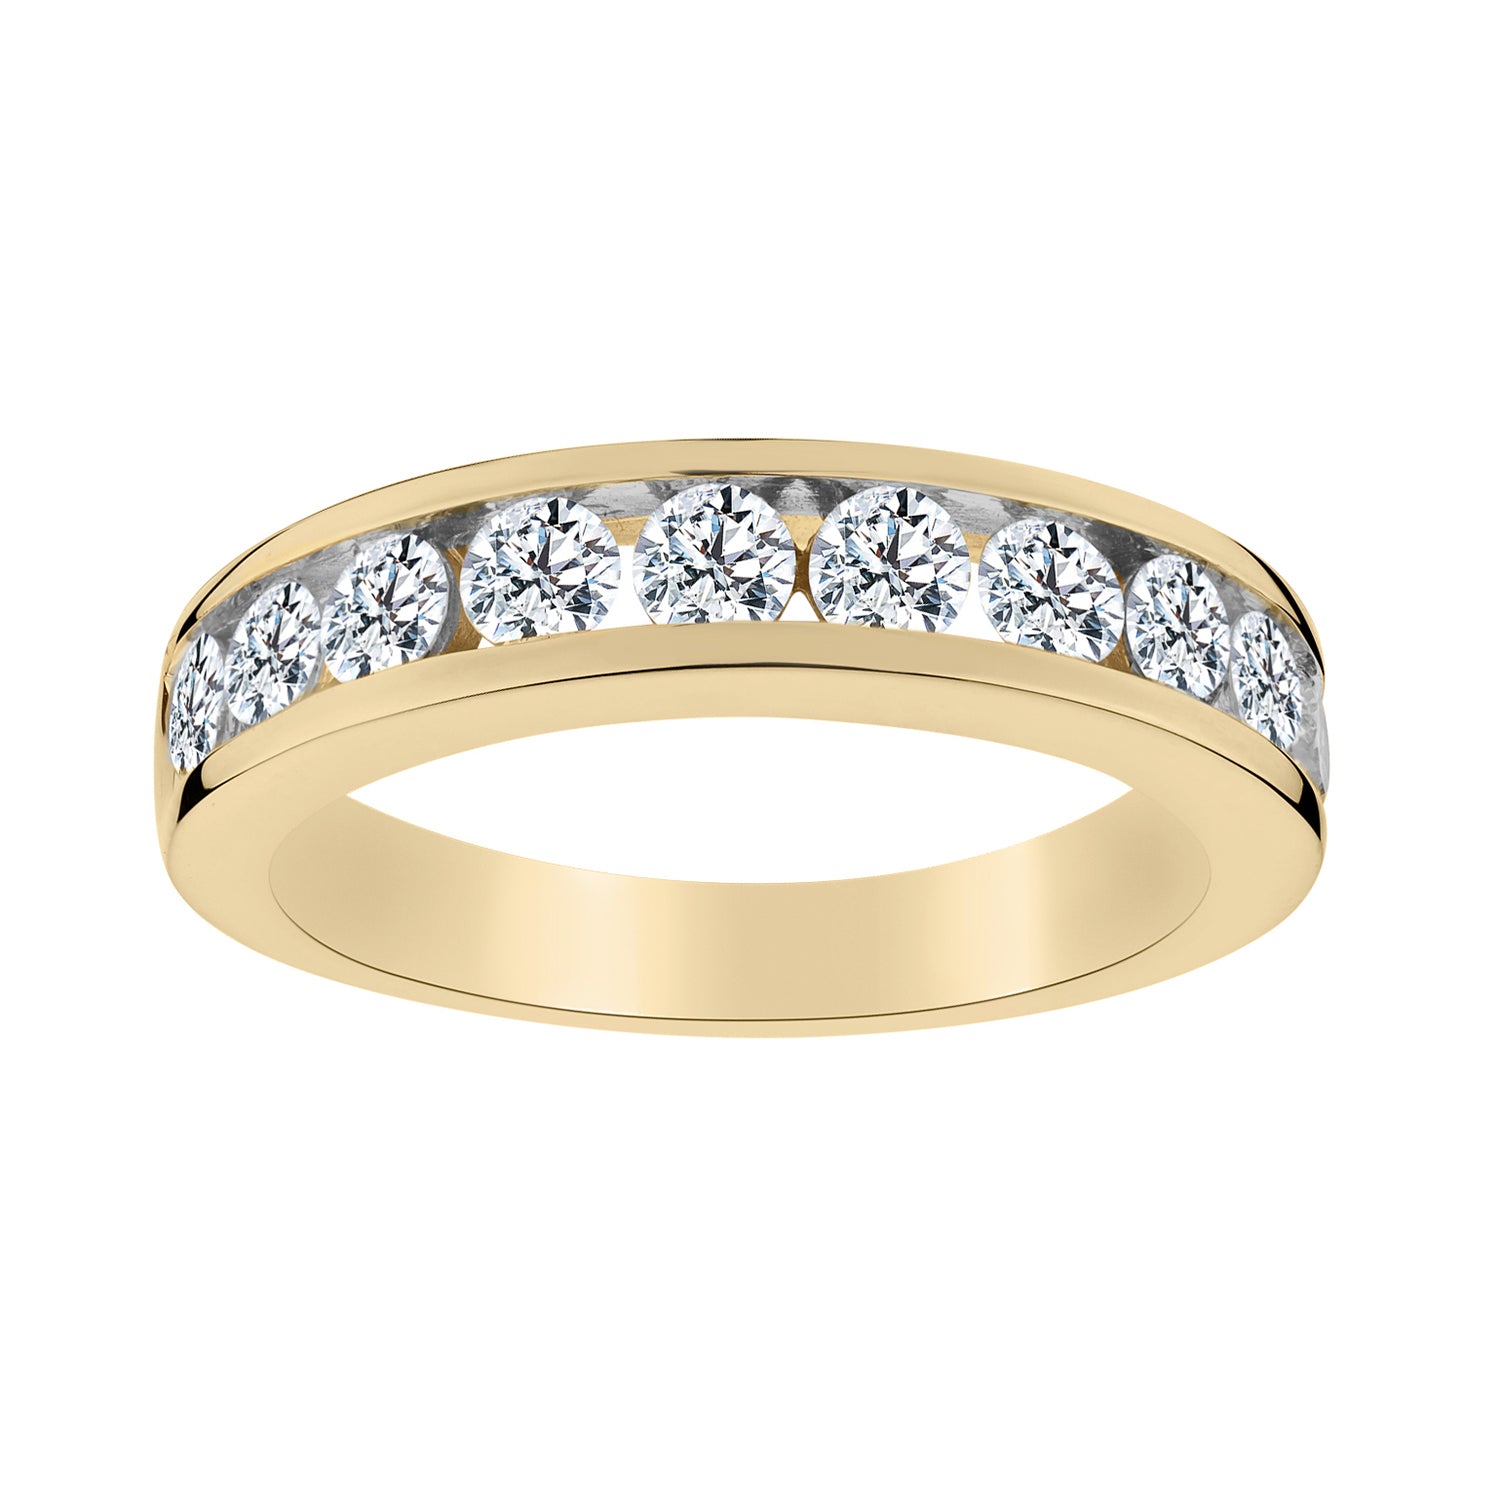 1.00 Carat of Diamonds Ring Band,  10kt Yellow Gold…...................NOW